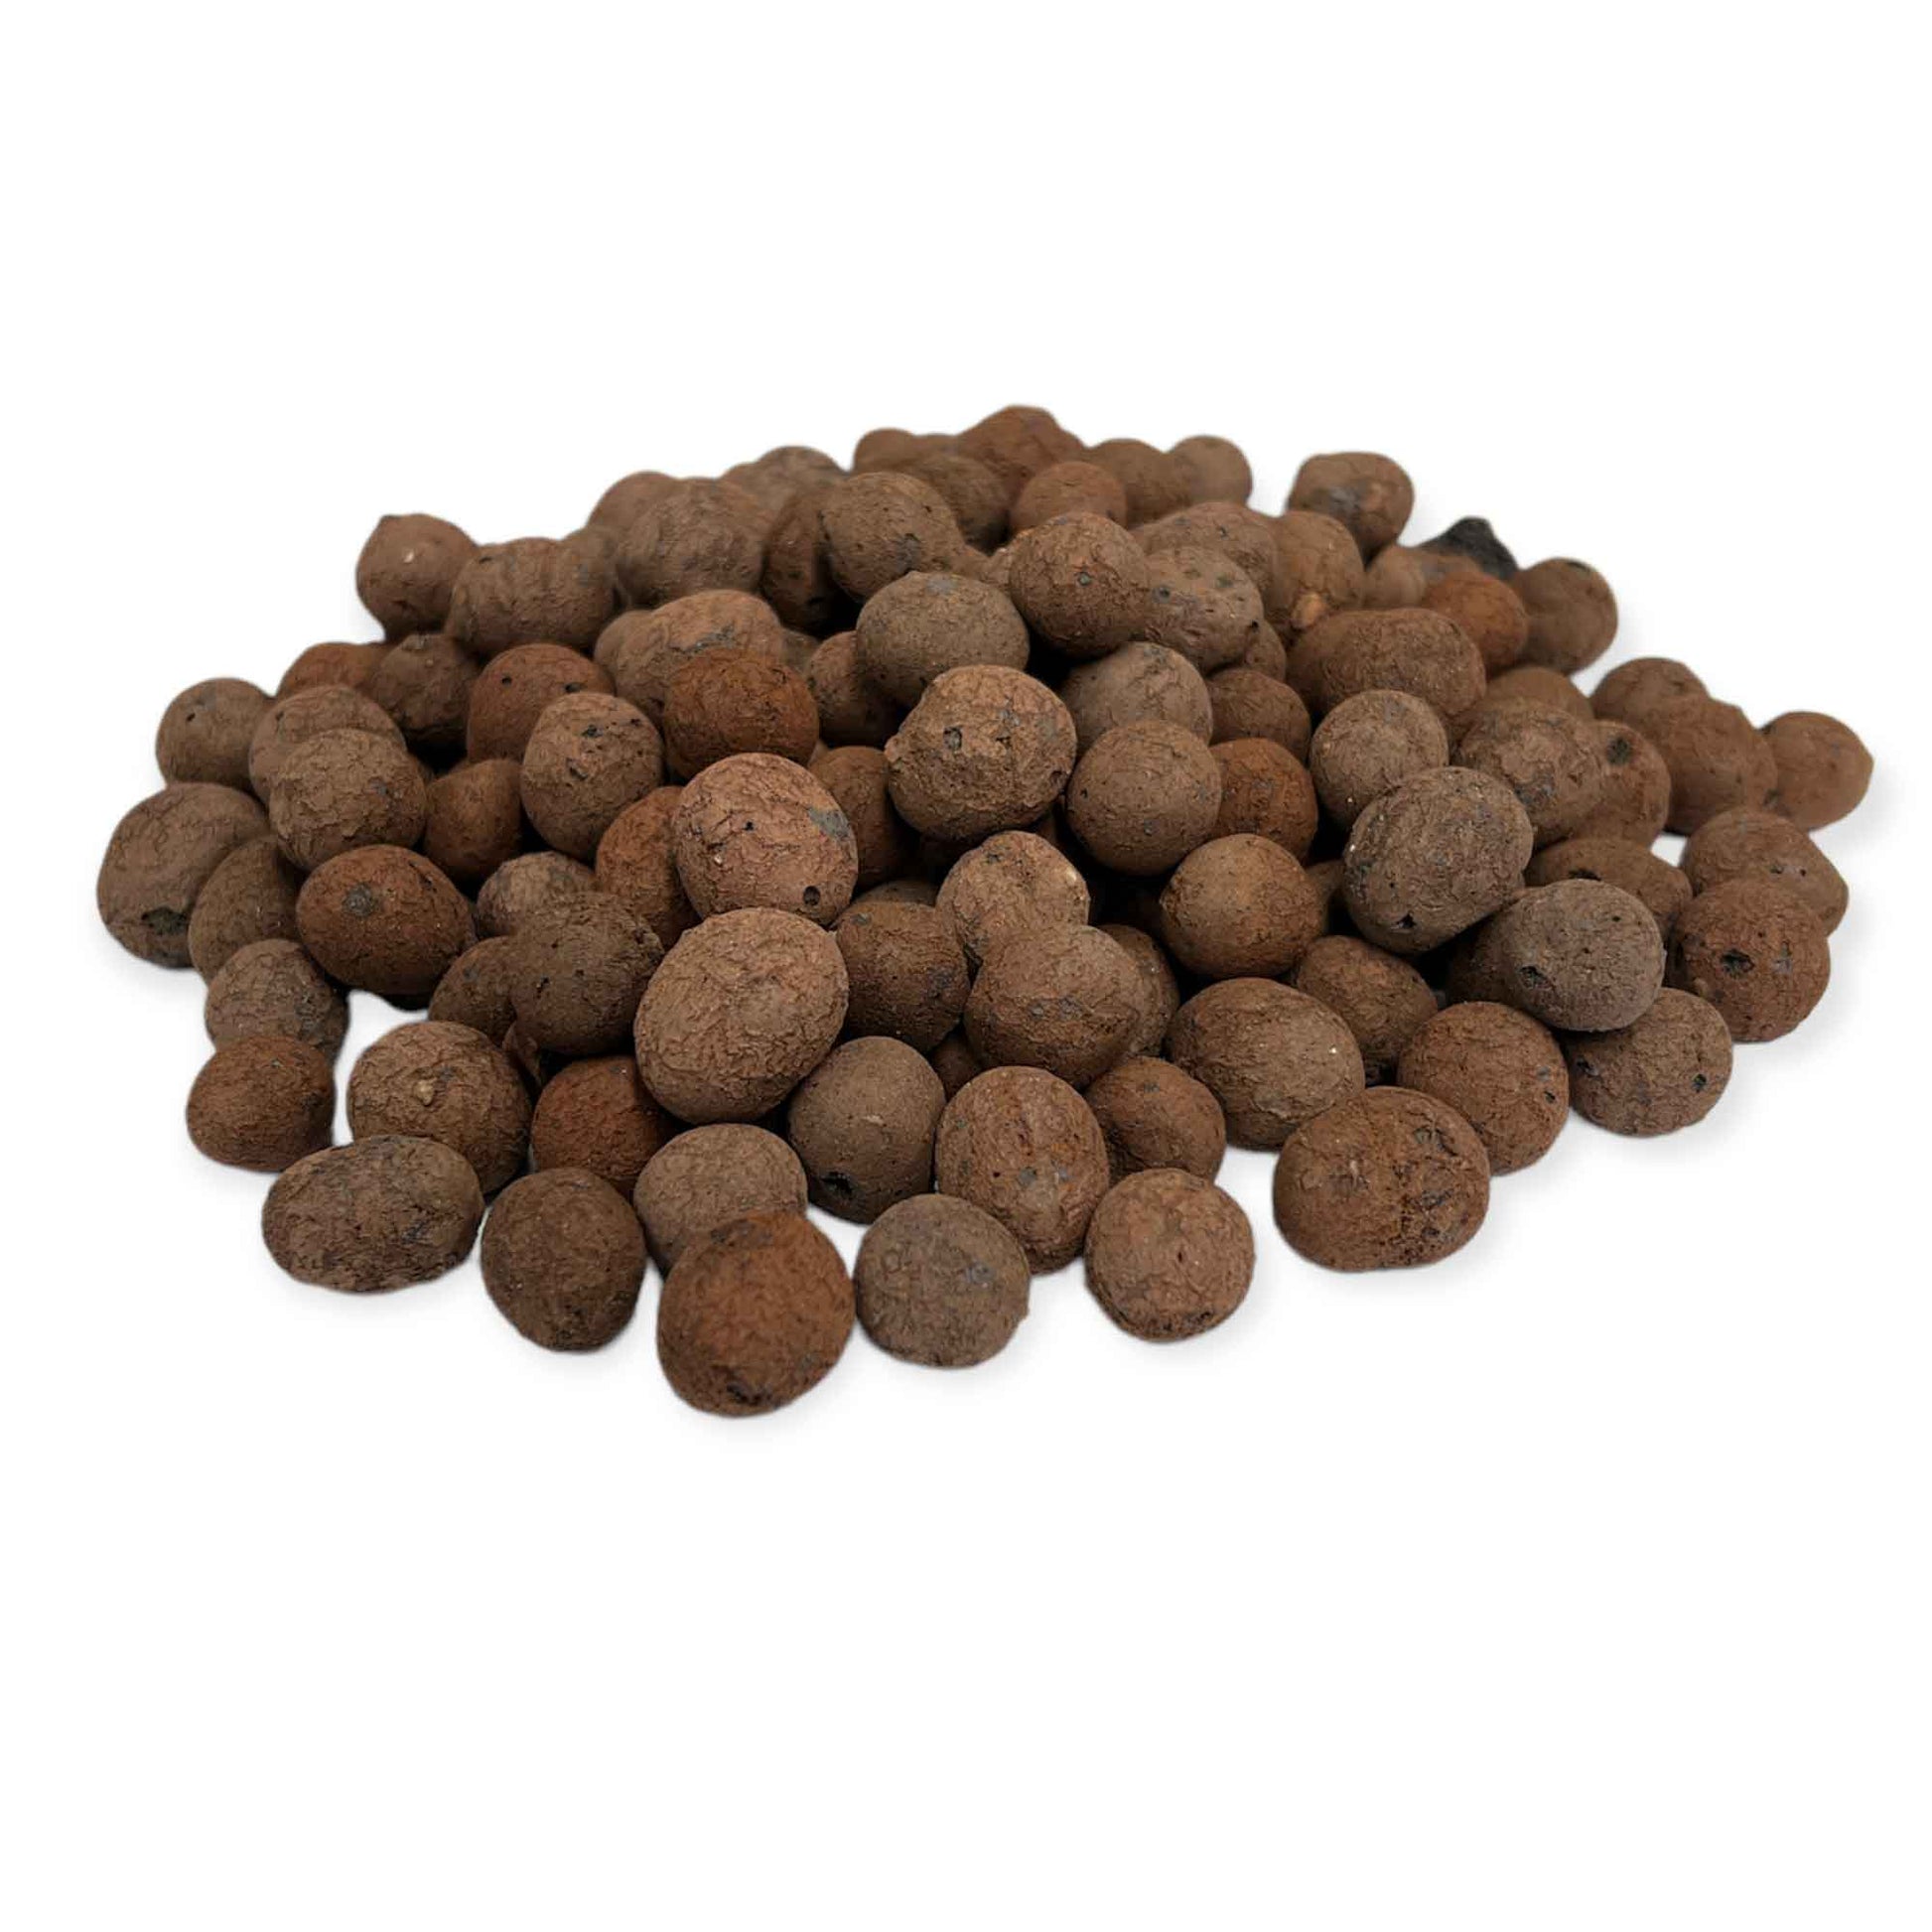 50L Expanded Hydro Clay Balls - Hydroponic Pebbles Plant Growing Medium Pellets